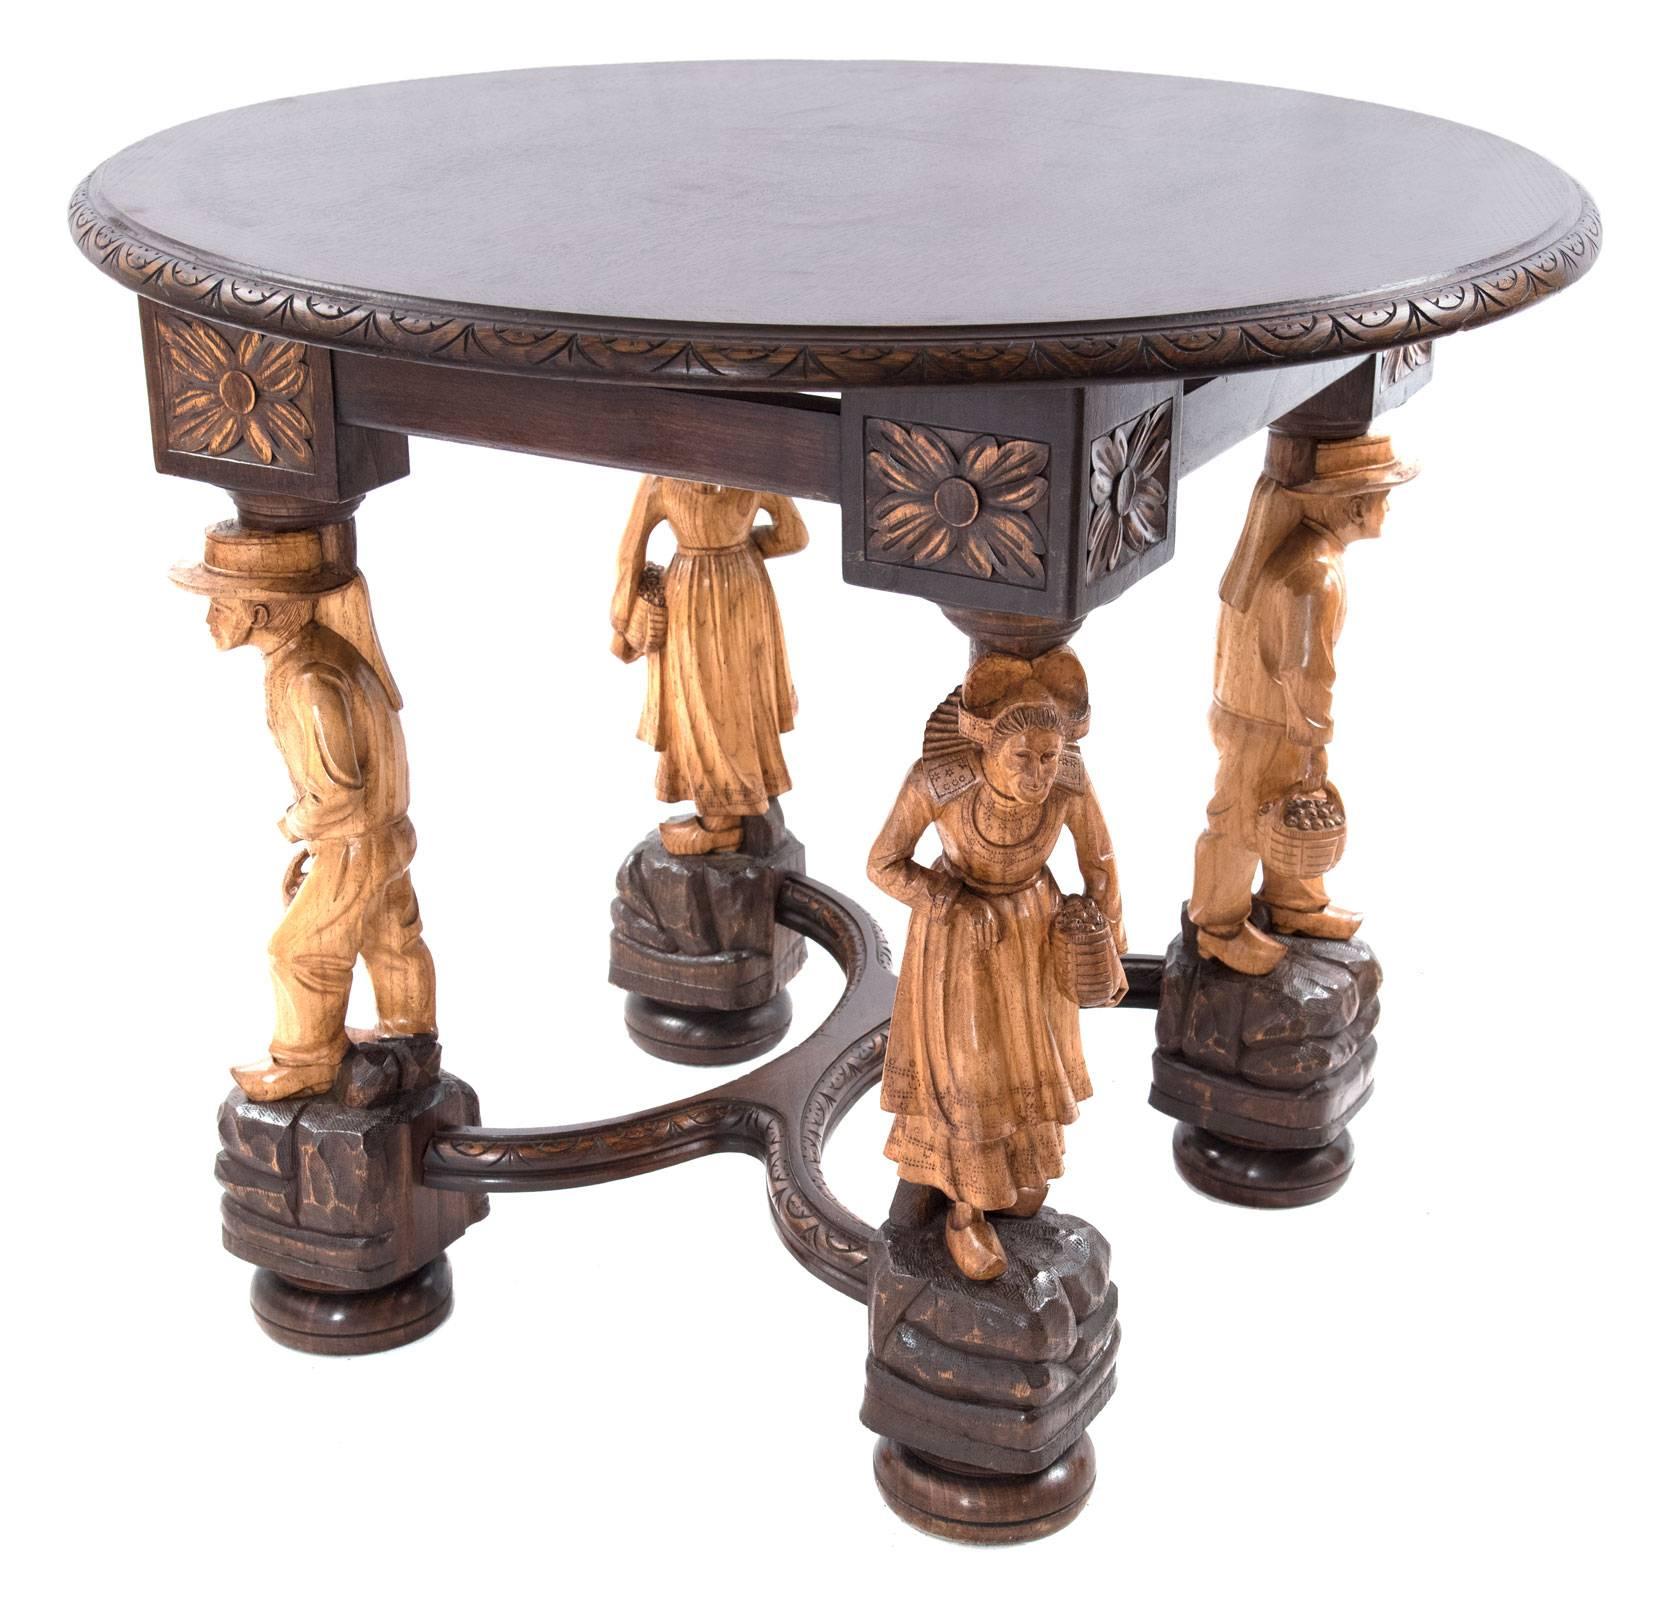 A 19th century carved tiger oak table, its circular top with a carved border above an apron joining square corner blocks that are carved with floral motif, each supported by figural legs of contrasting light wood that are raised on rockwork base and